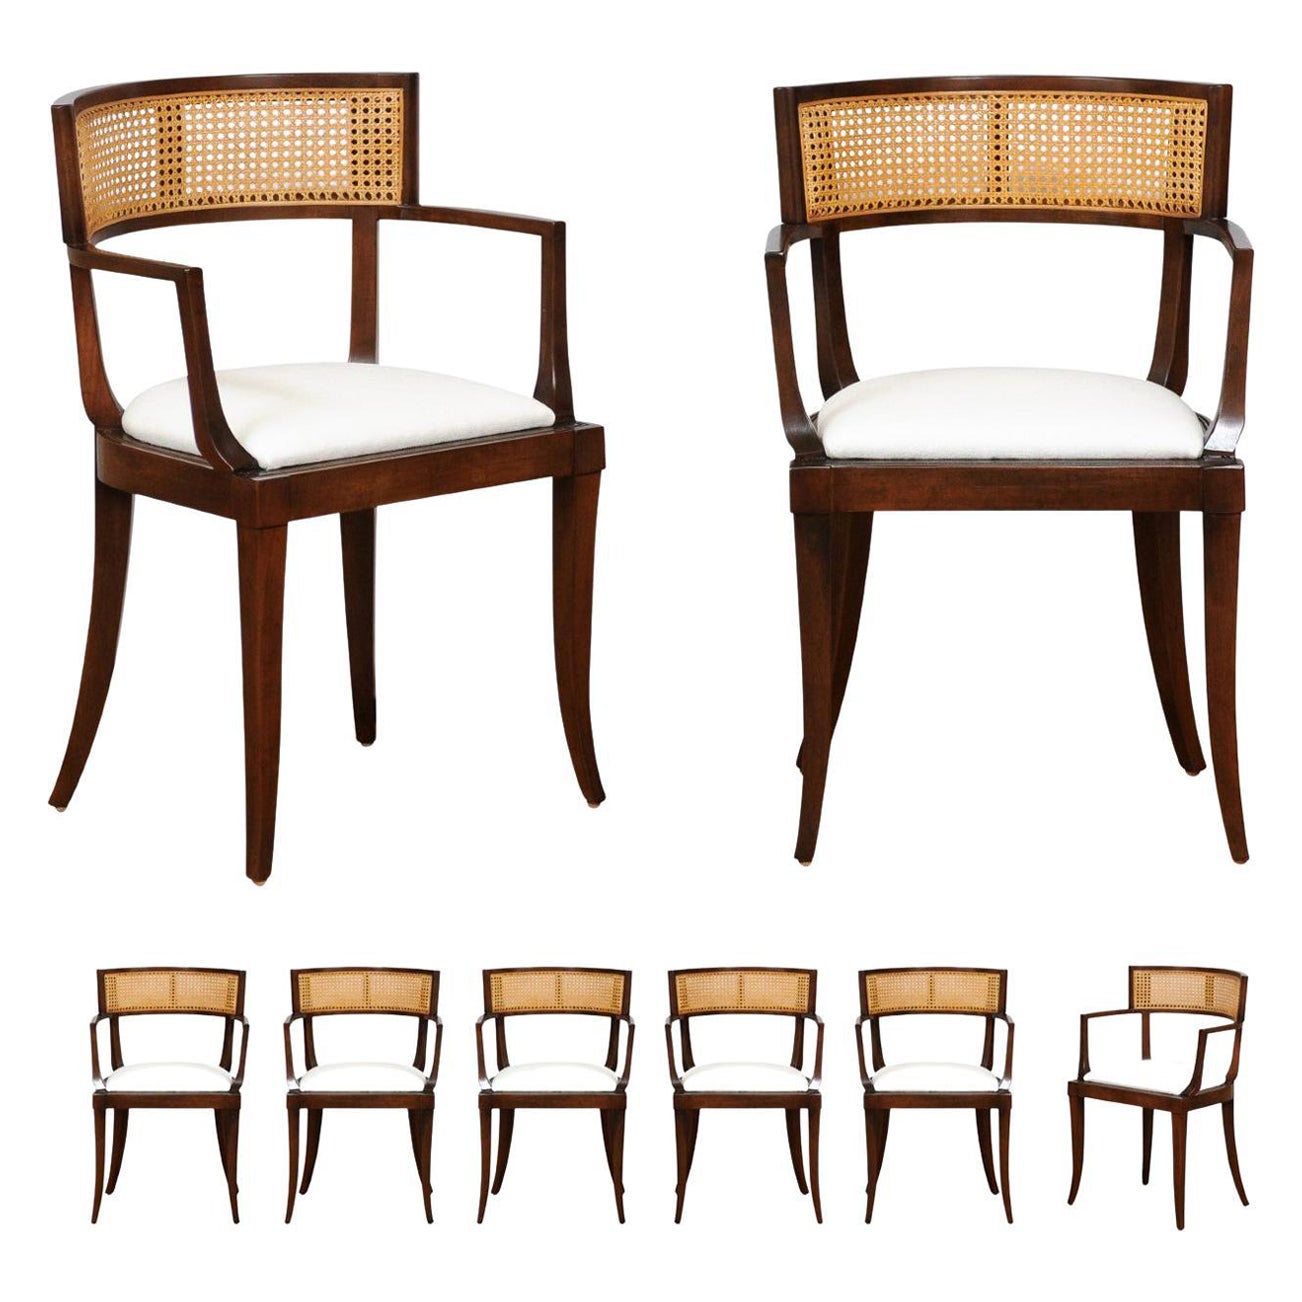 All Arm, Exquisite Set of 8 Klismos Cane Dining Chairs by Baker, circa 1958